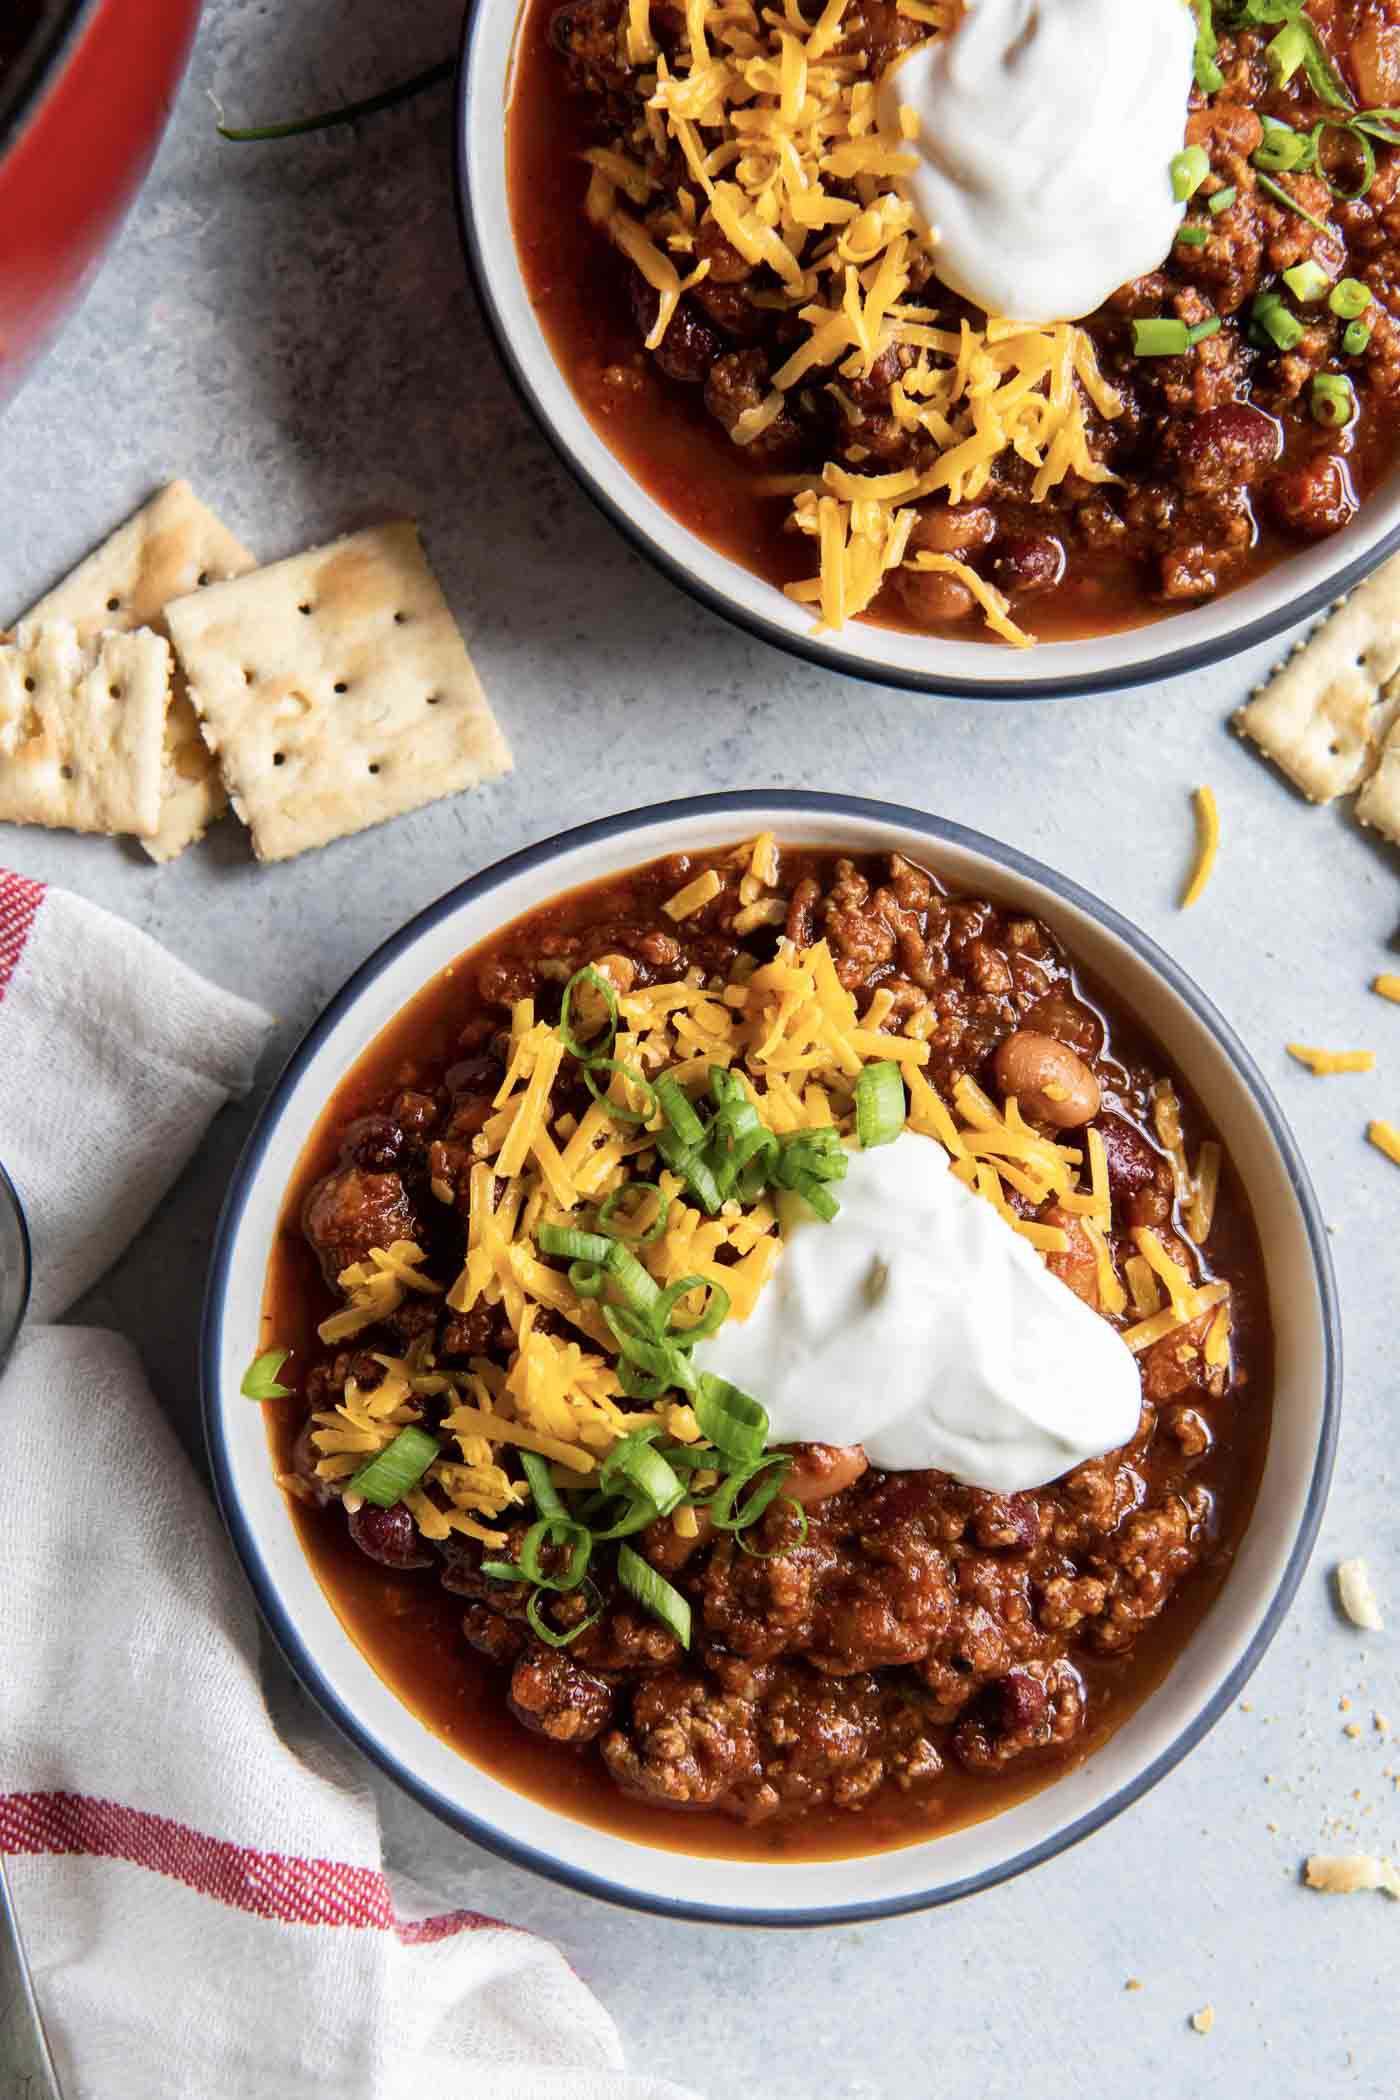 Two bowls of chili with cheese, sour cream and green onions.